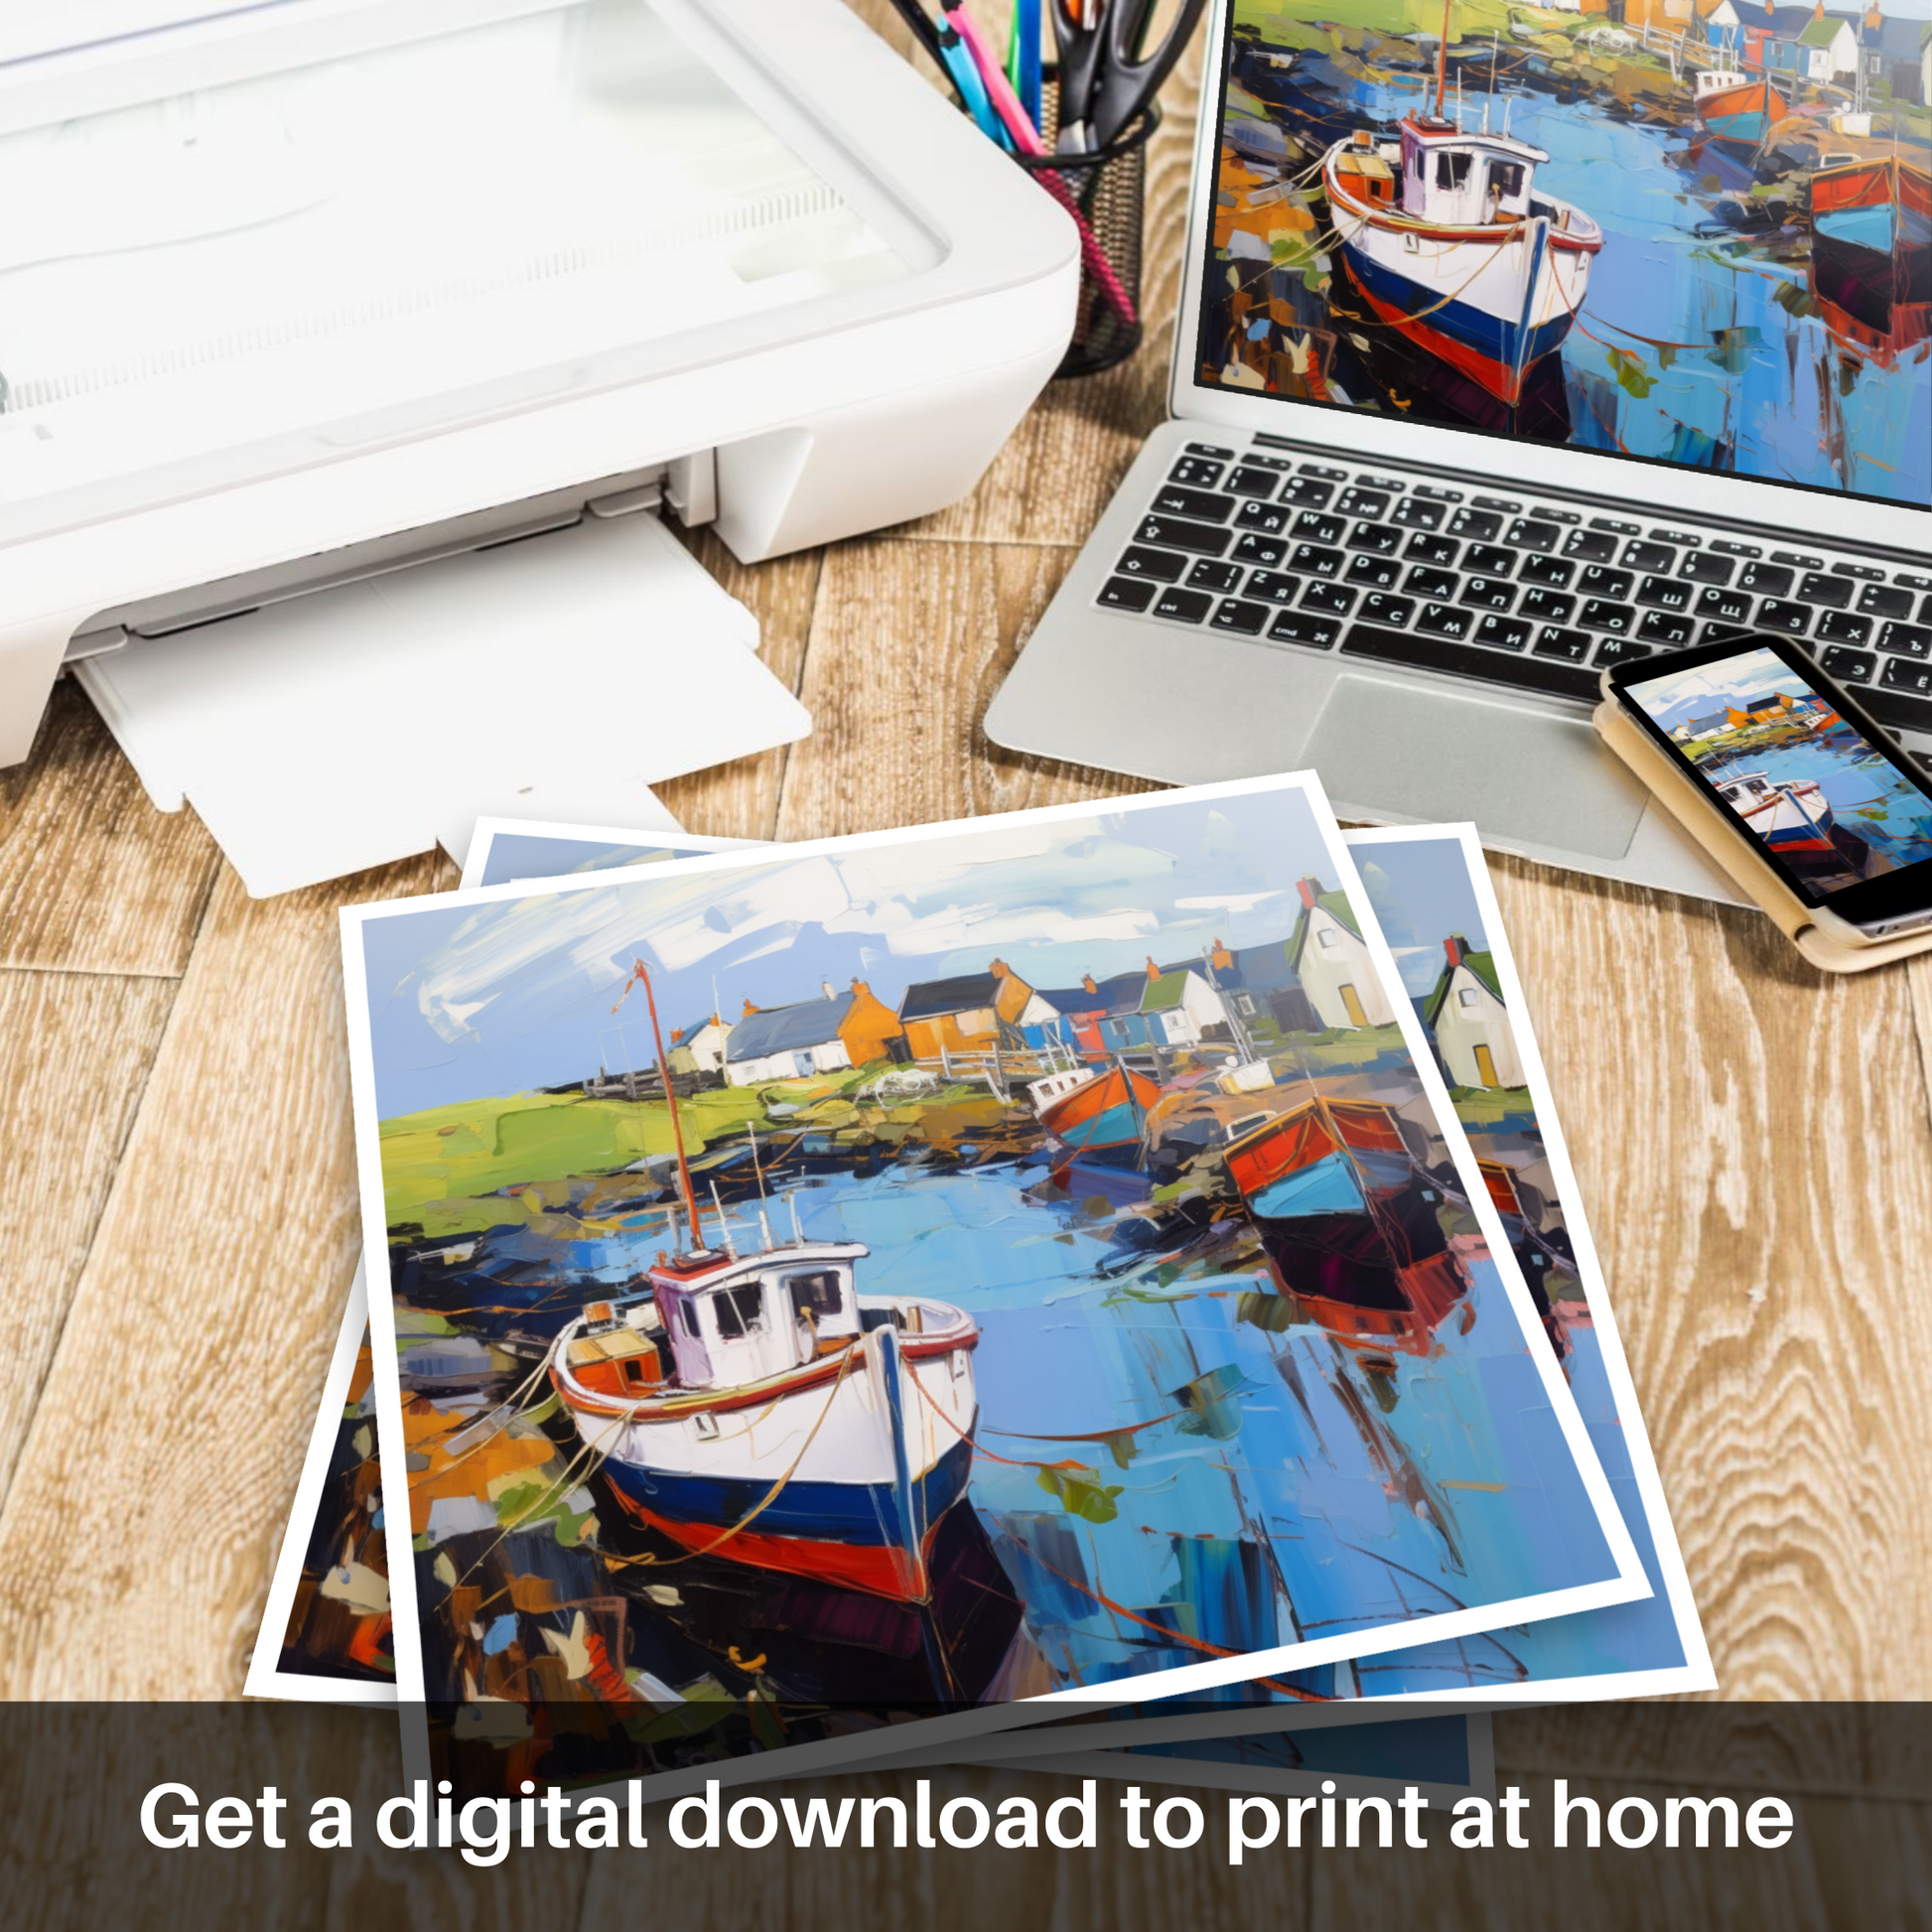 Downloadable and printable picture of Lybster Harbour, Caithness